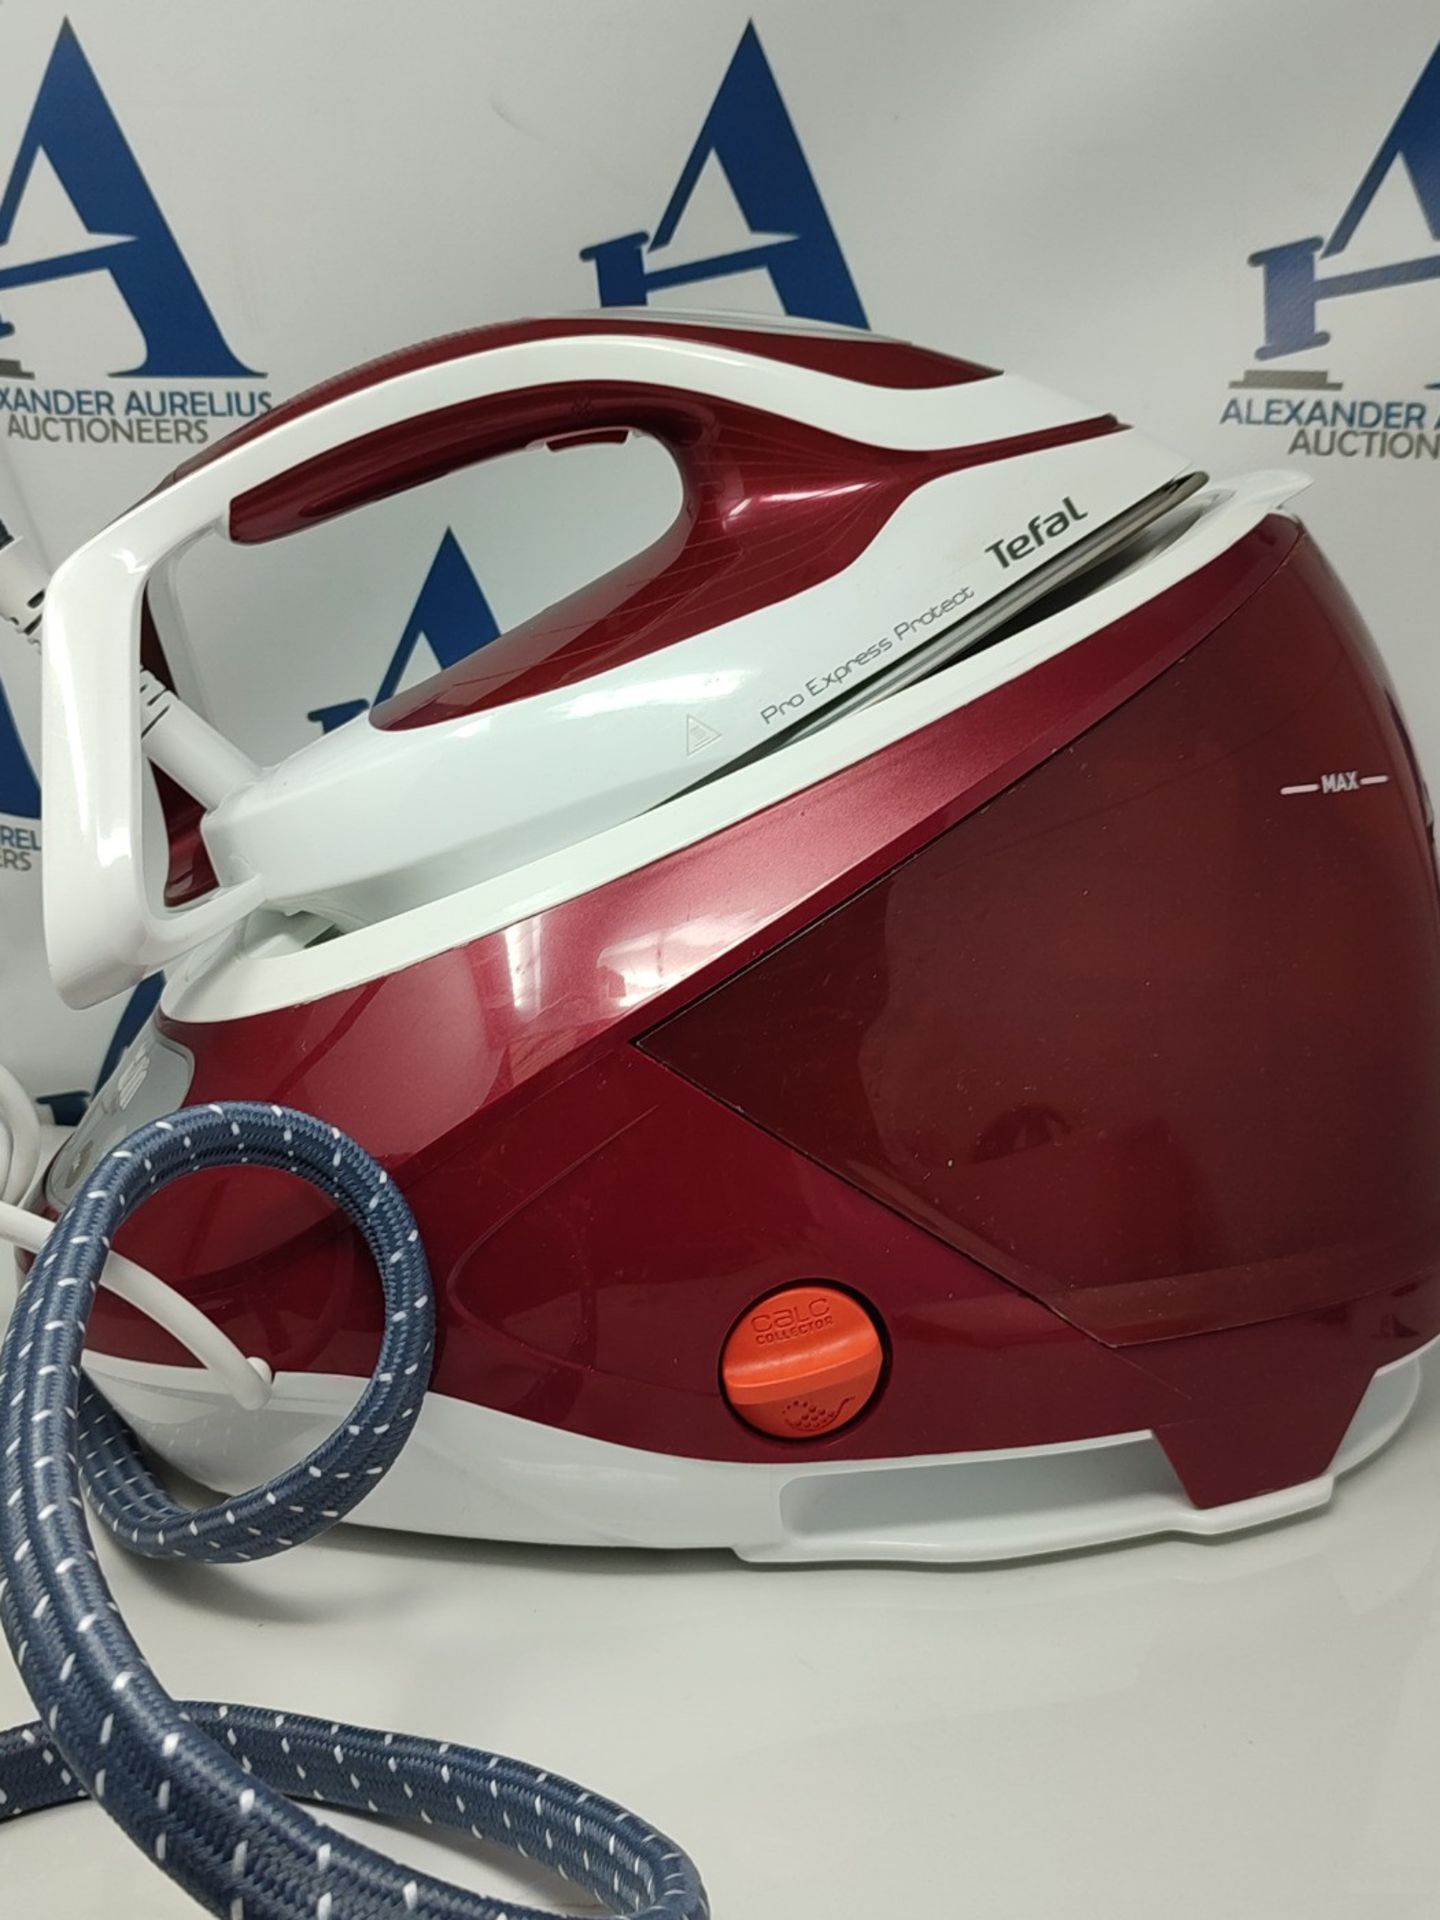 RRP £199.00 Tefal High Pressure Steam Generator Iron, Pro Express Protect, white & Burgundy, GV922 - Image 3 of 3